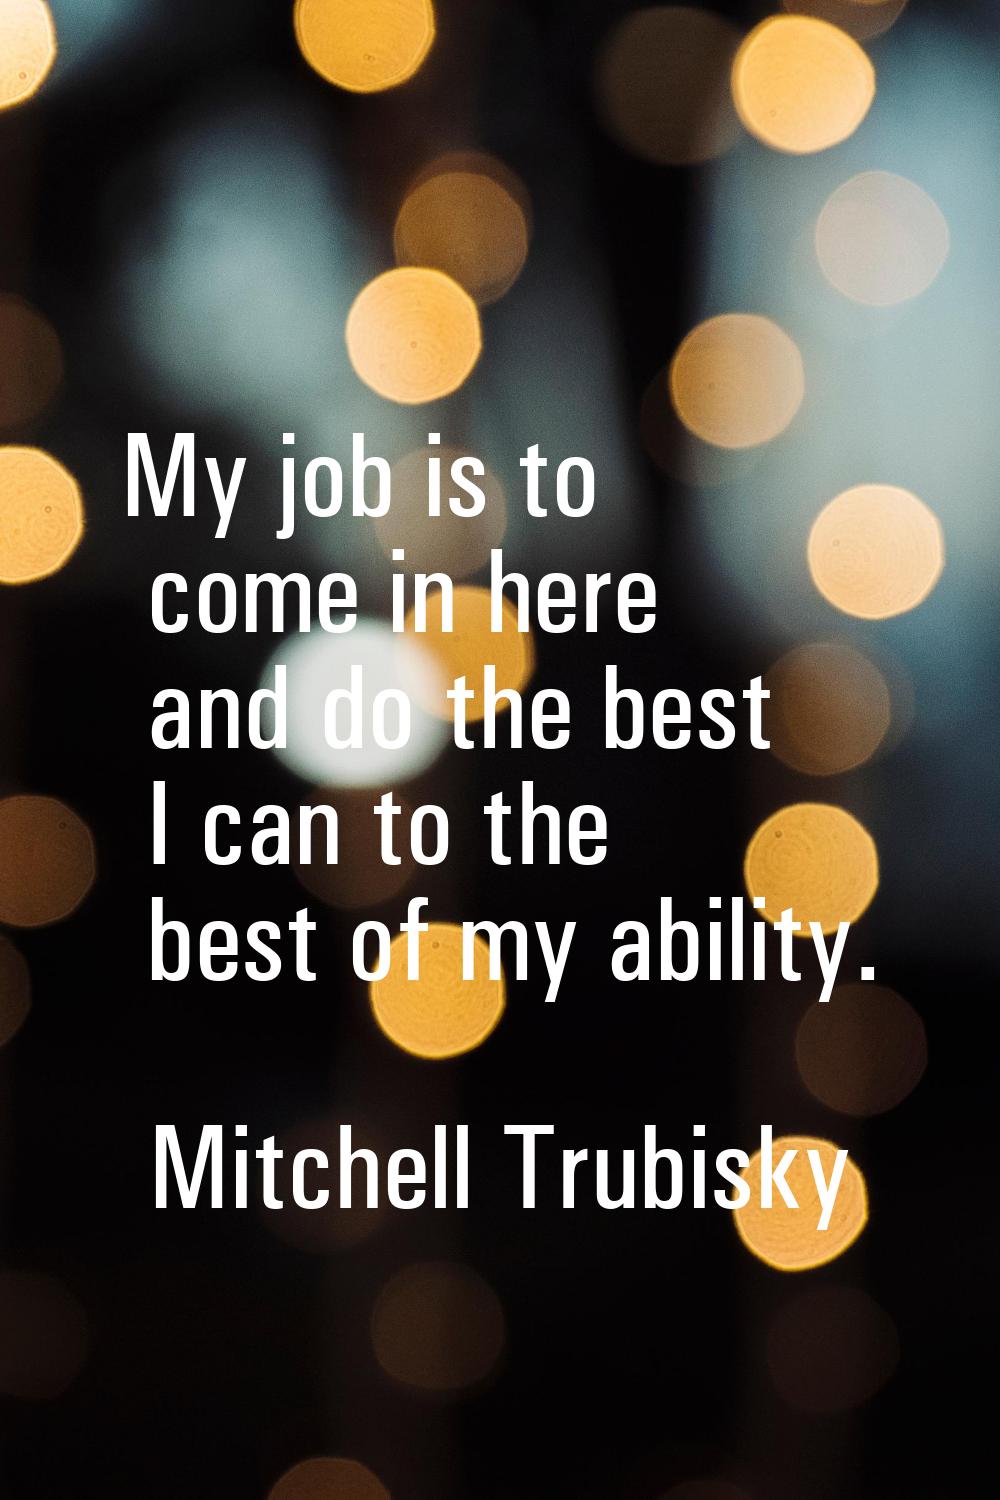 My job is to come in here and do the best I can to the best of my ability.